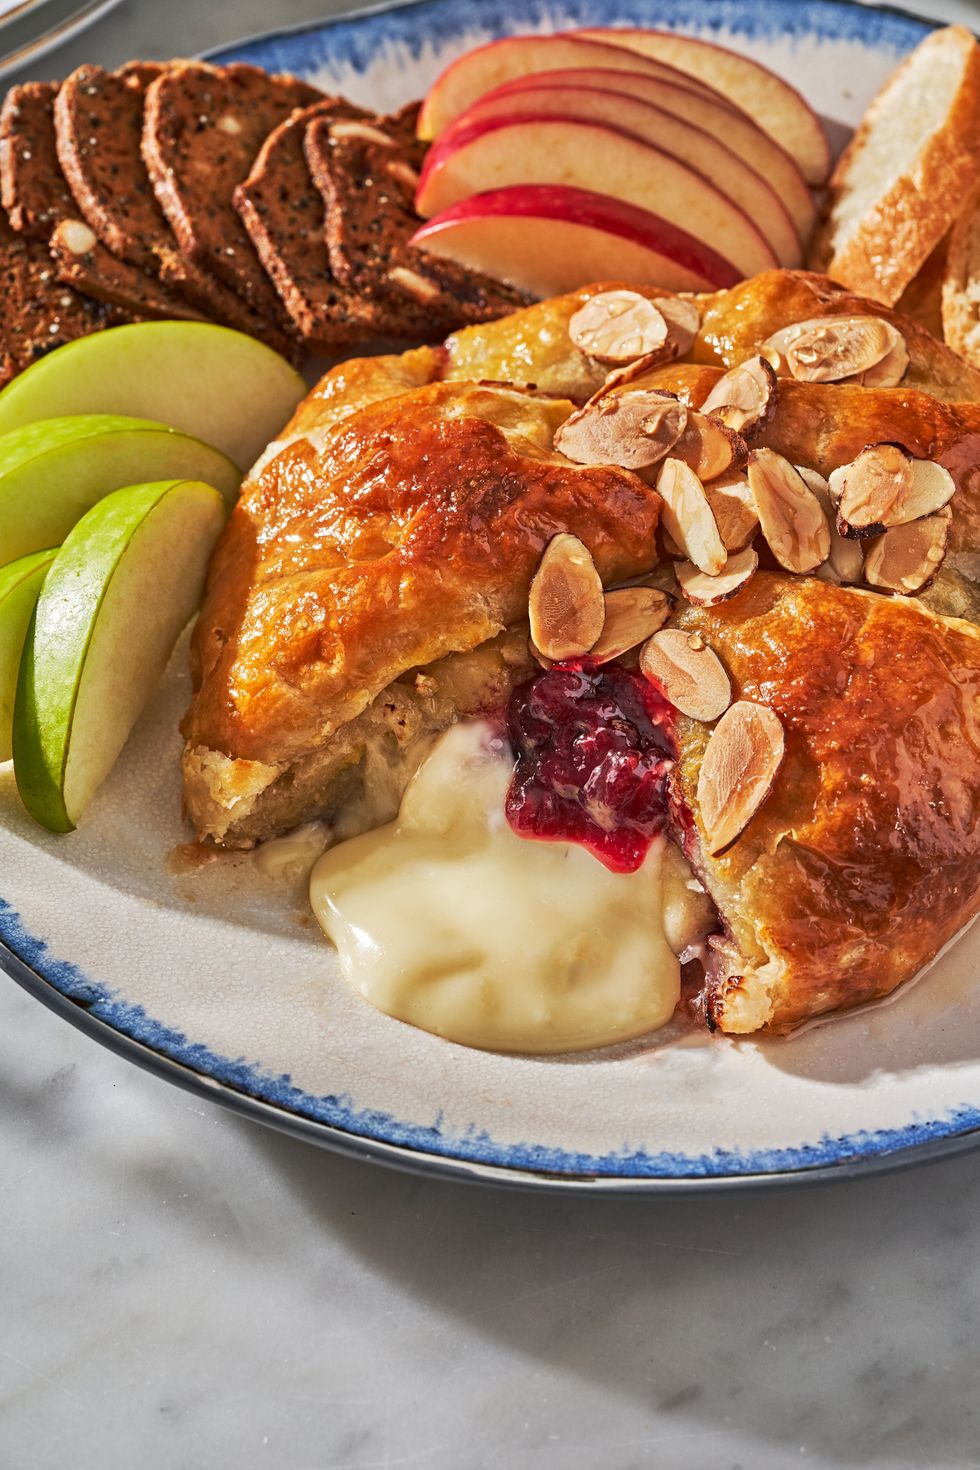 Baked Brie with Apples, Honey and Nuts - Del's cooking twist